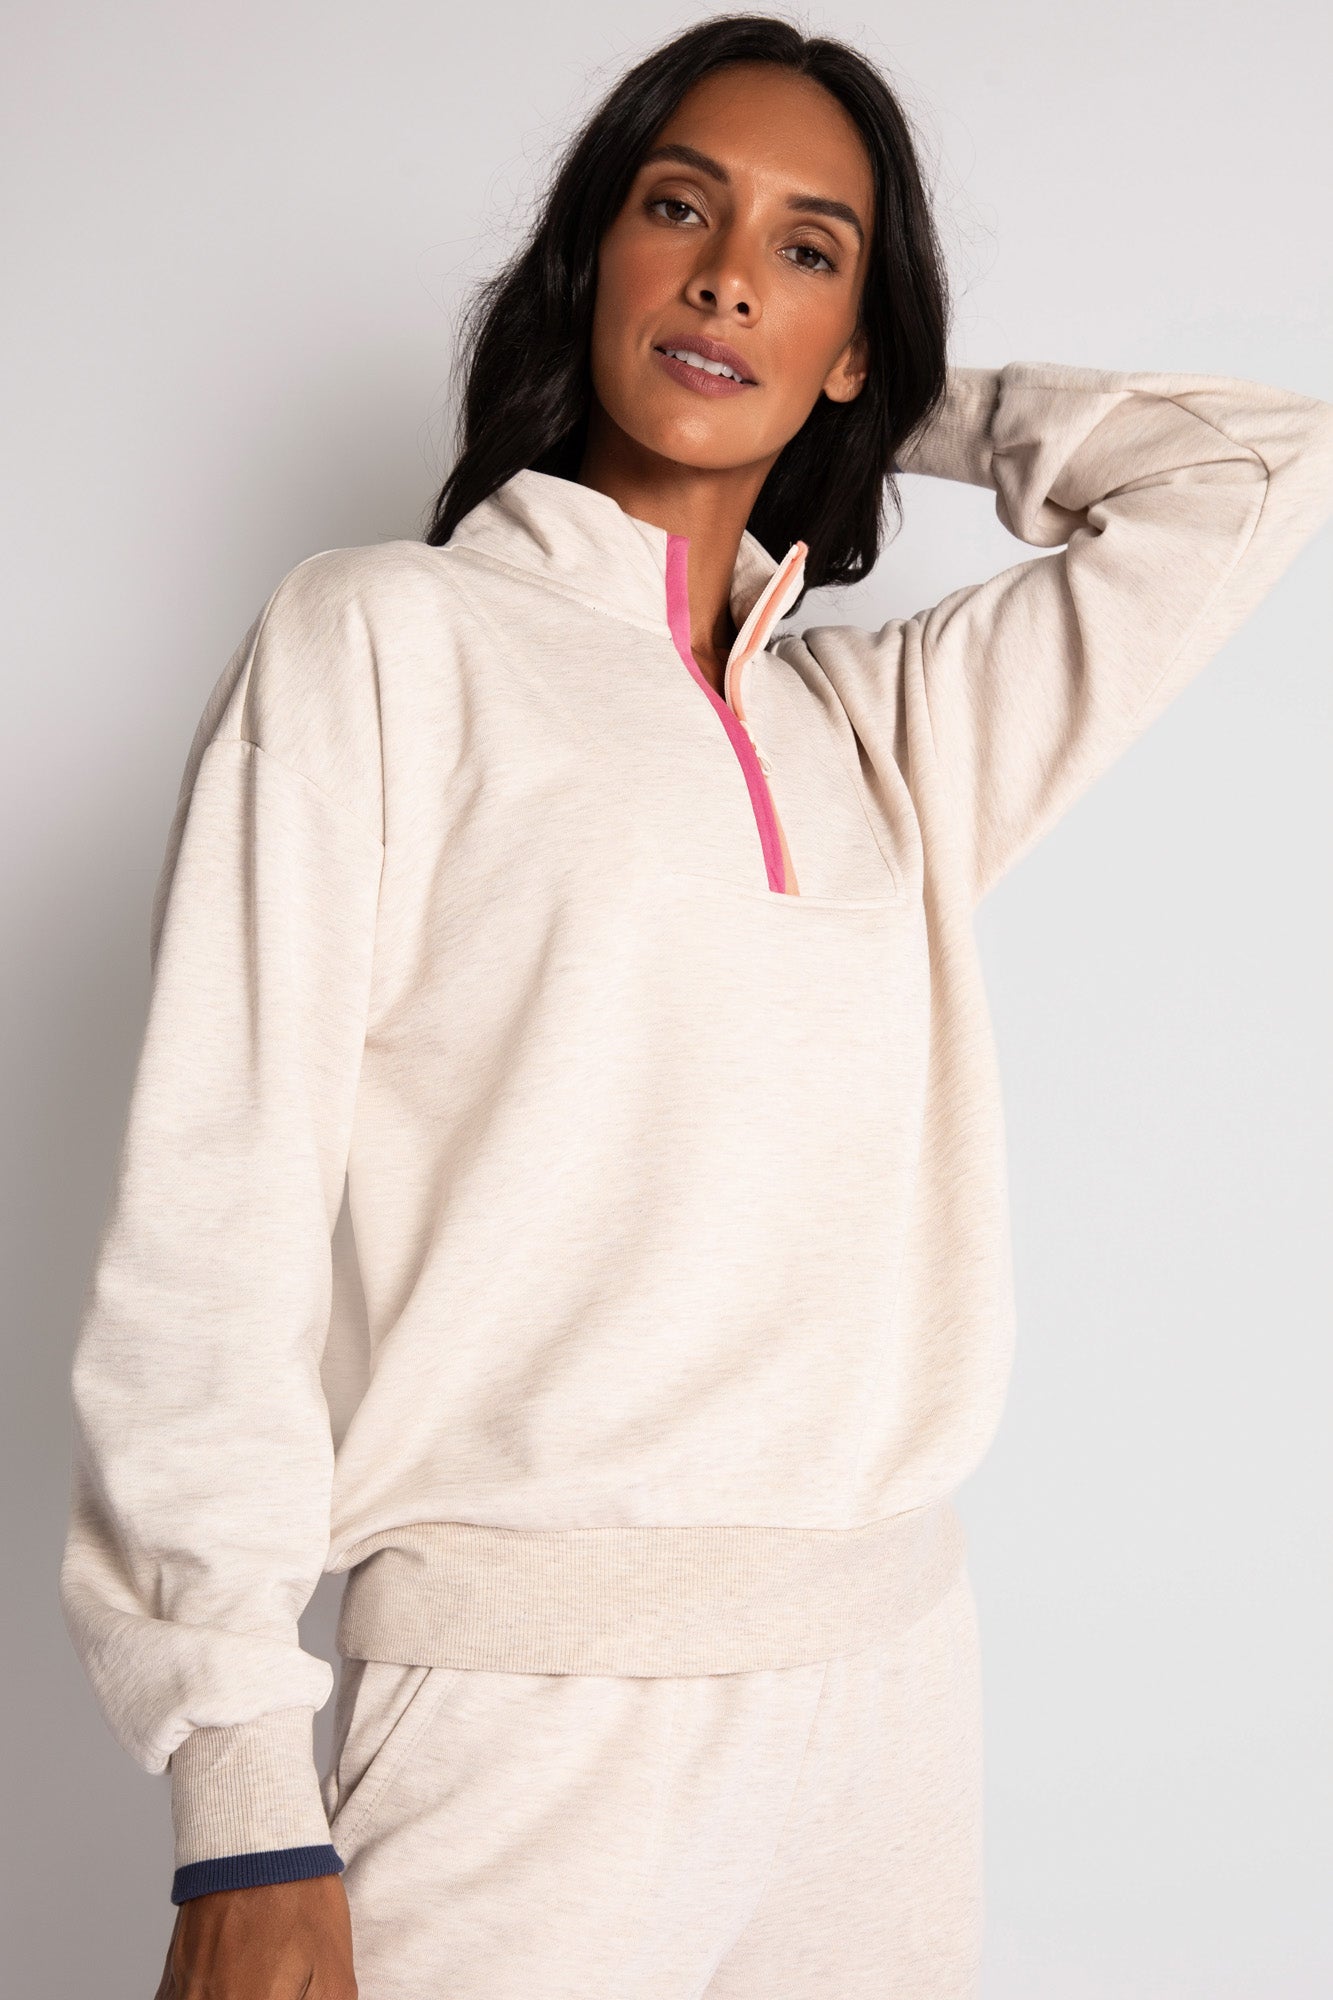 Fashion (Rose)Zip Front Hooded Tee And Shorts Loungewear Tracksuit